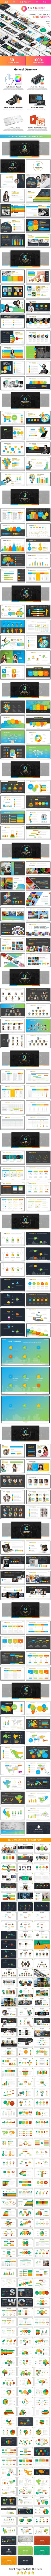 GraphicRiver 2 in 1 Marketing Bundle Powerpoint 21184793